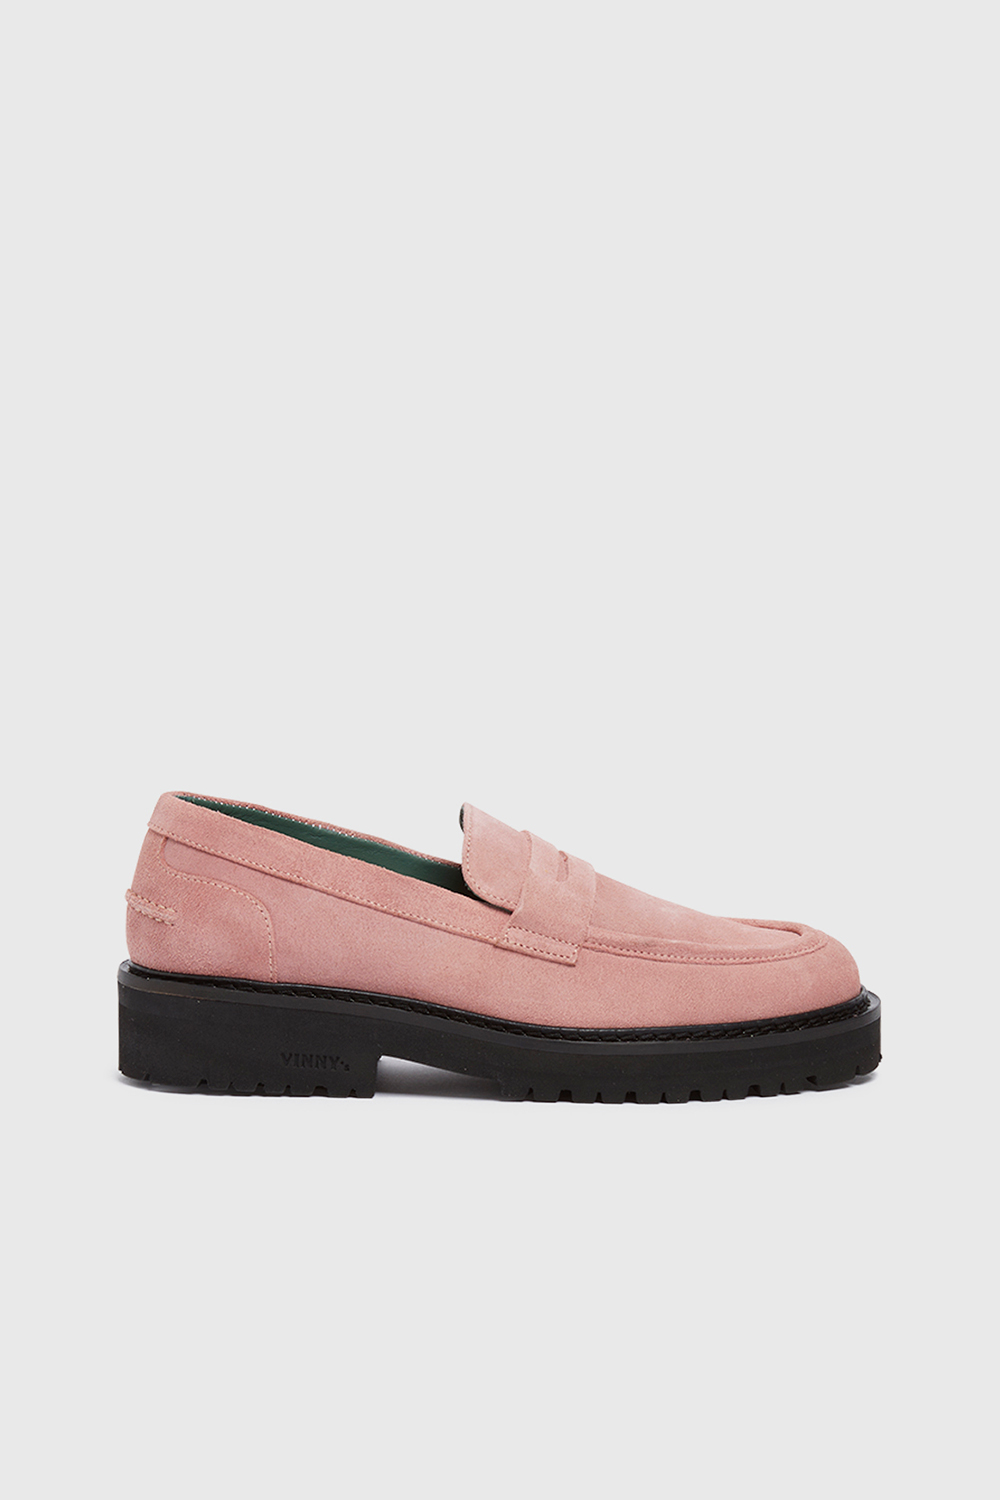 Vinny's Wood Wood x Richee Penny Loafer Pink suede | WoodWood.com